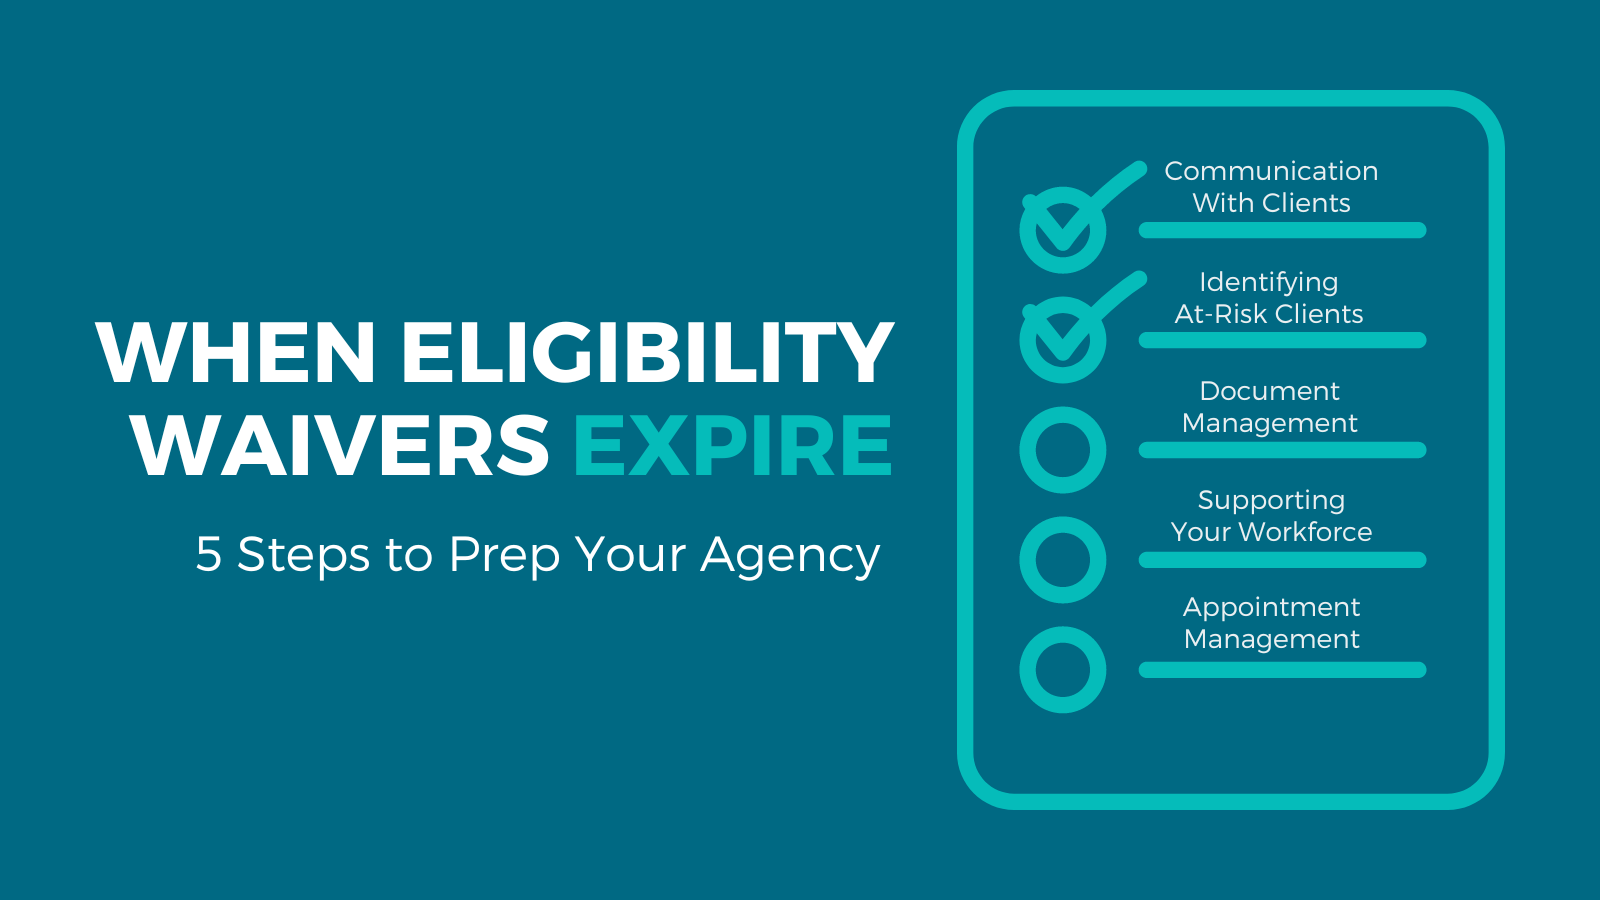 When Eligibility Waivers Expire: 5 Steps to Prep Your Agency